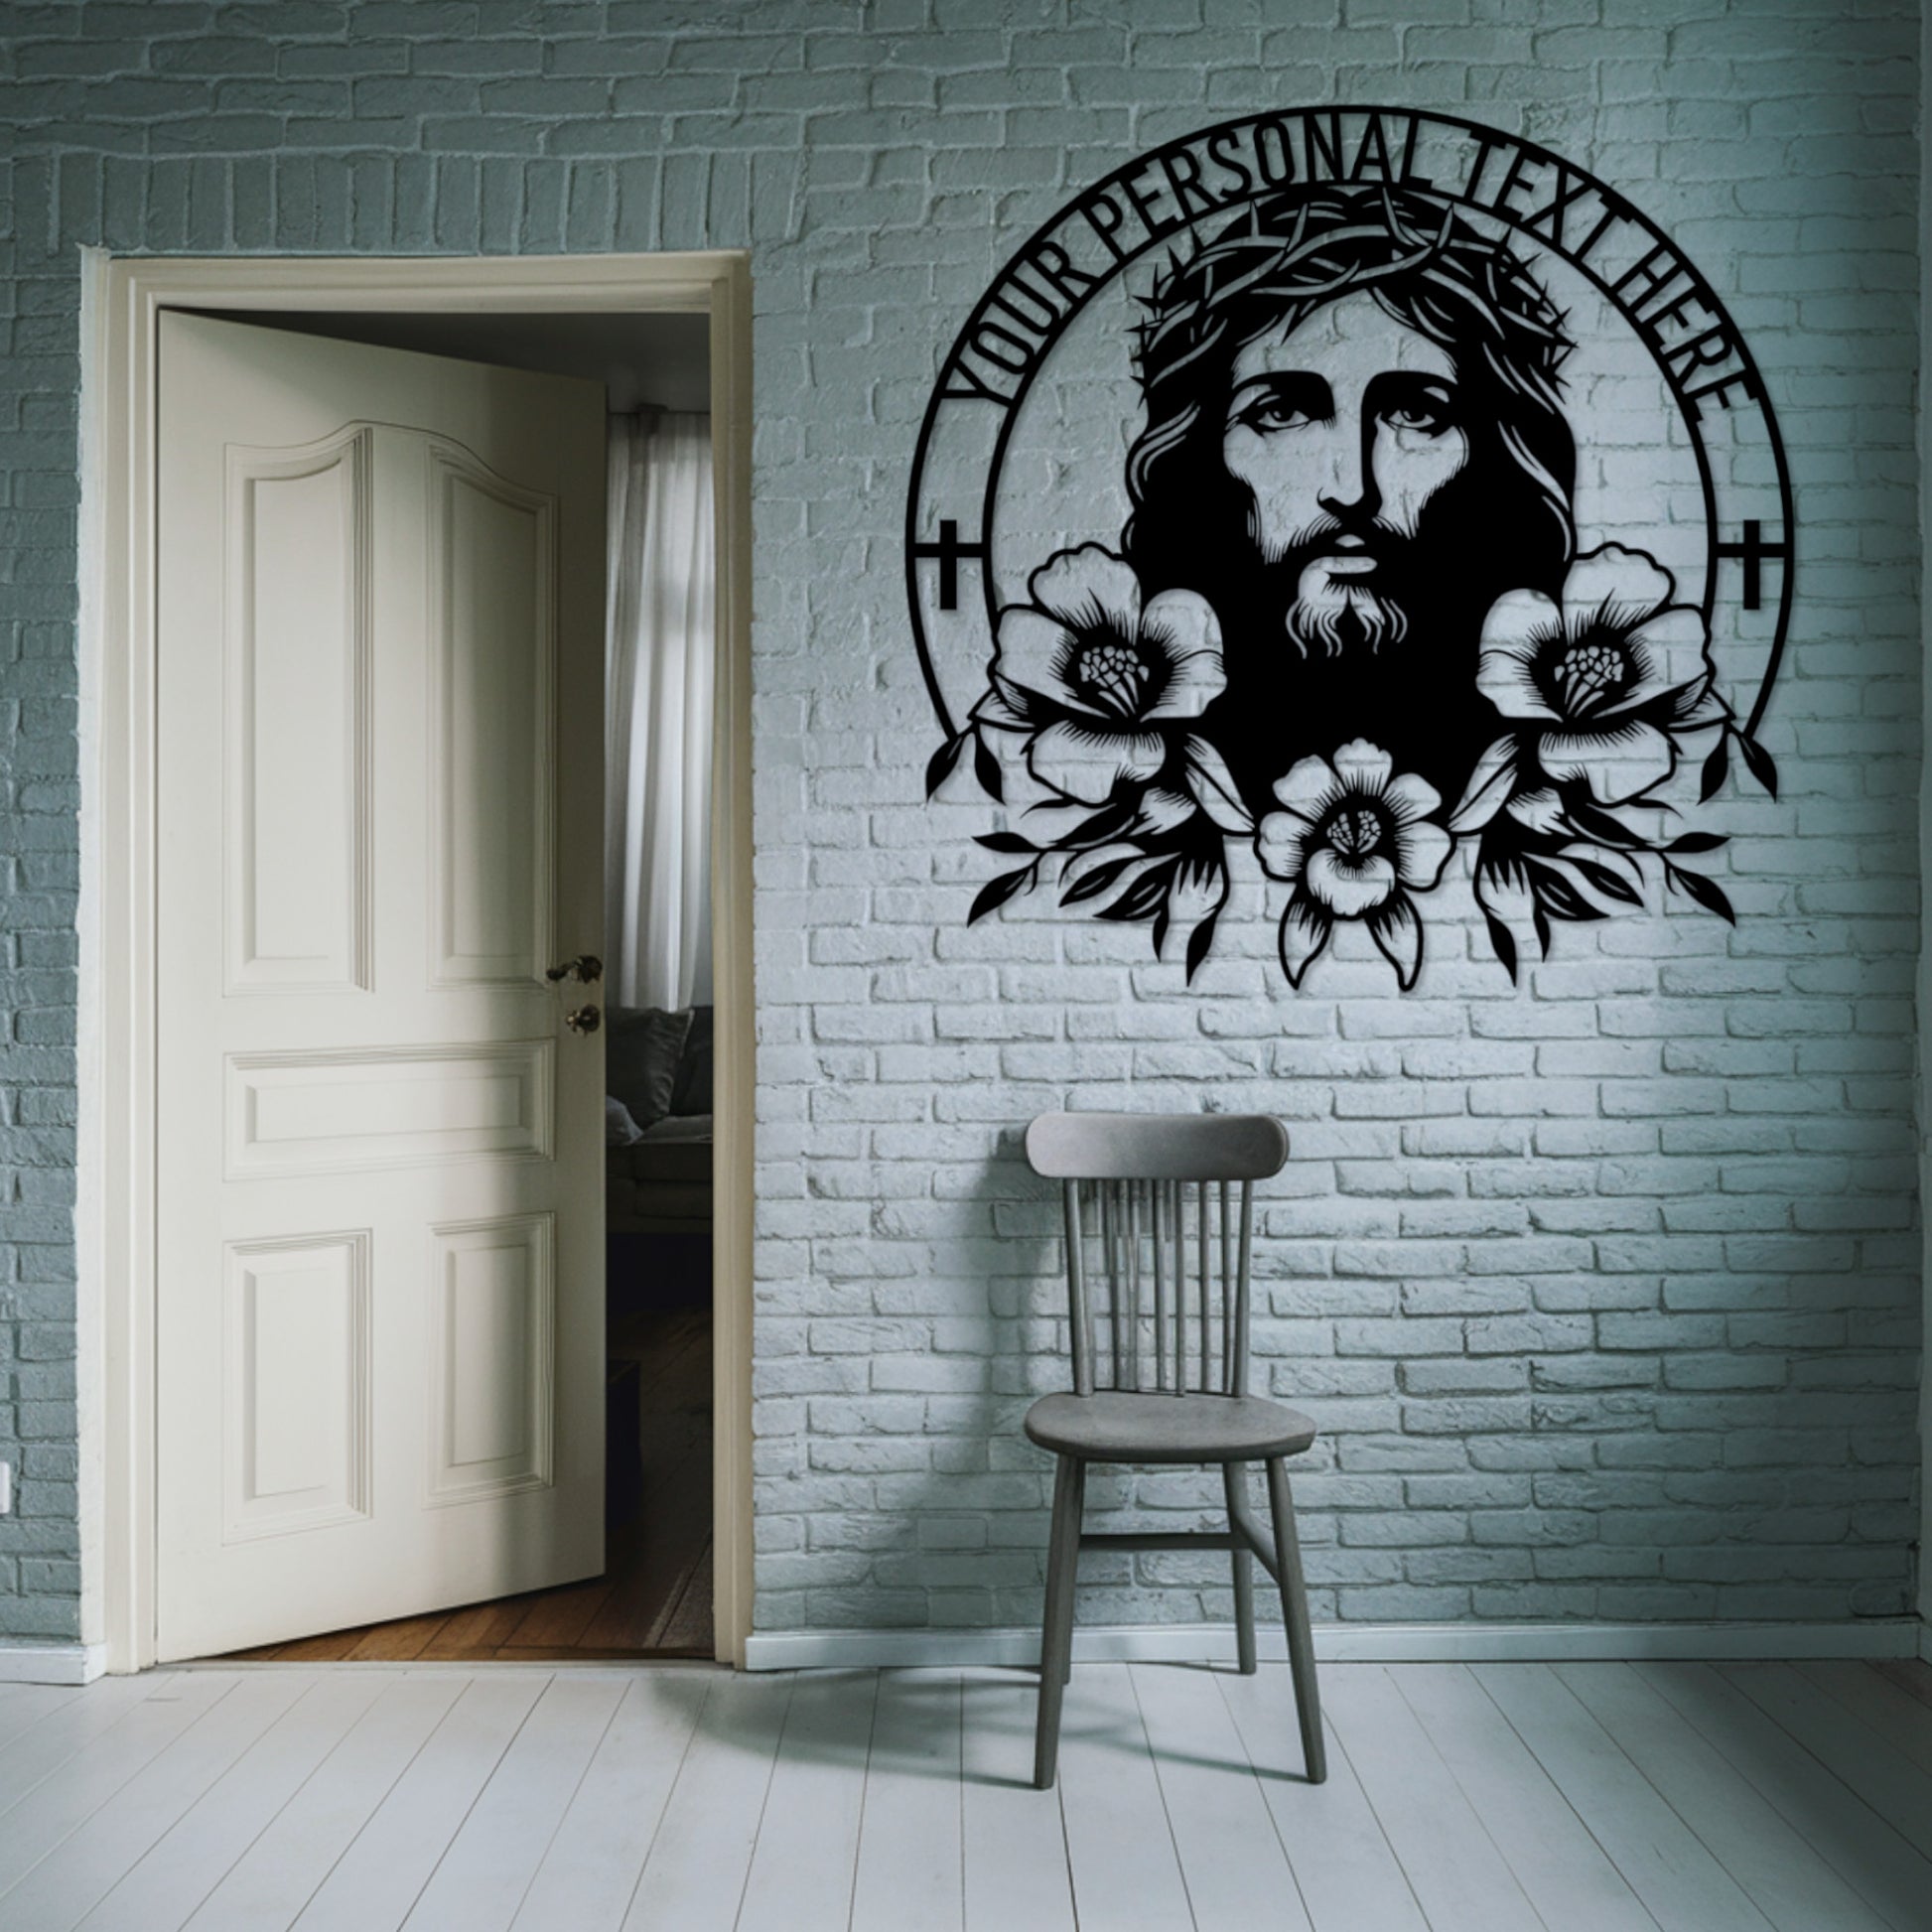 Personalized Jesus Metal Art sign. Custom Christian Wall Decor Gift. Religious Wall Hanging. Unique Floral Faith Decoration. Spiritual Decor